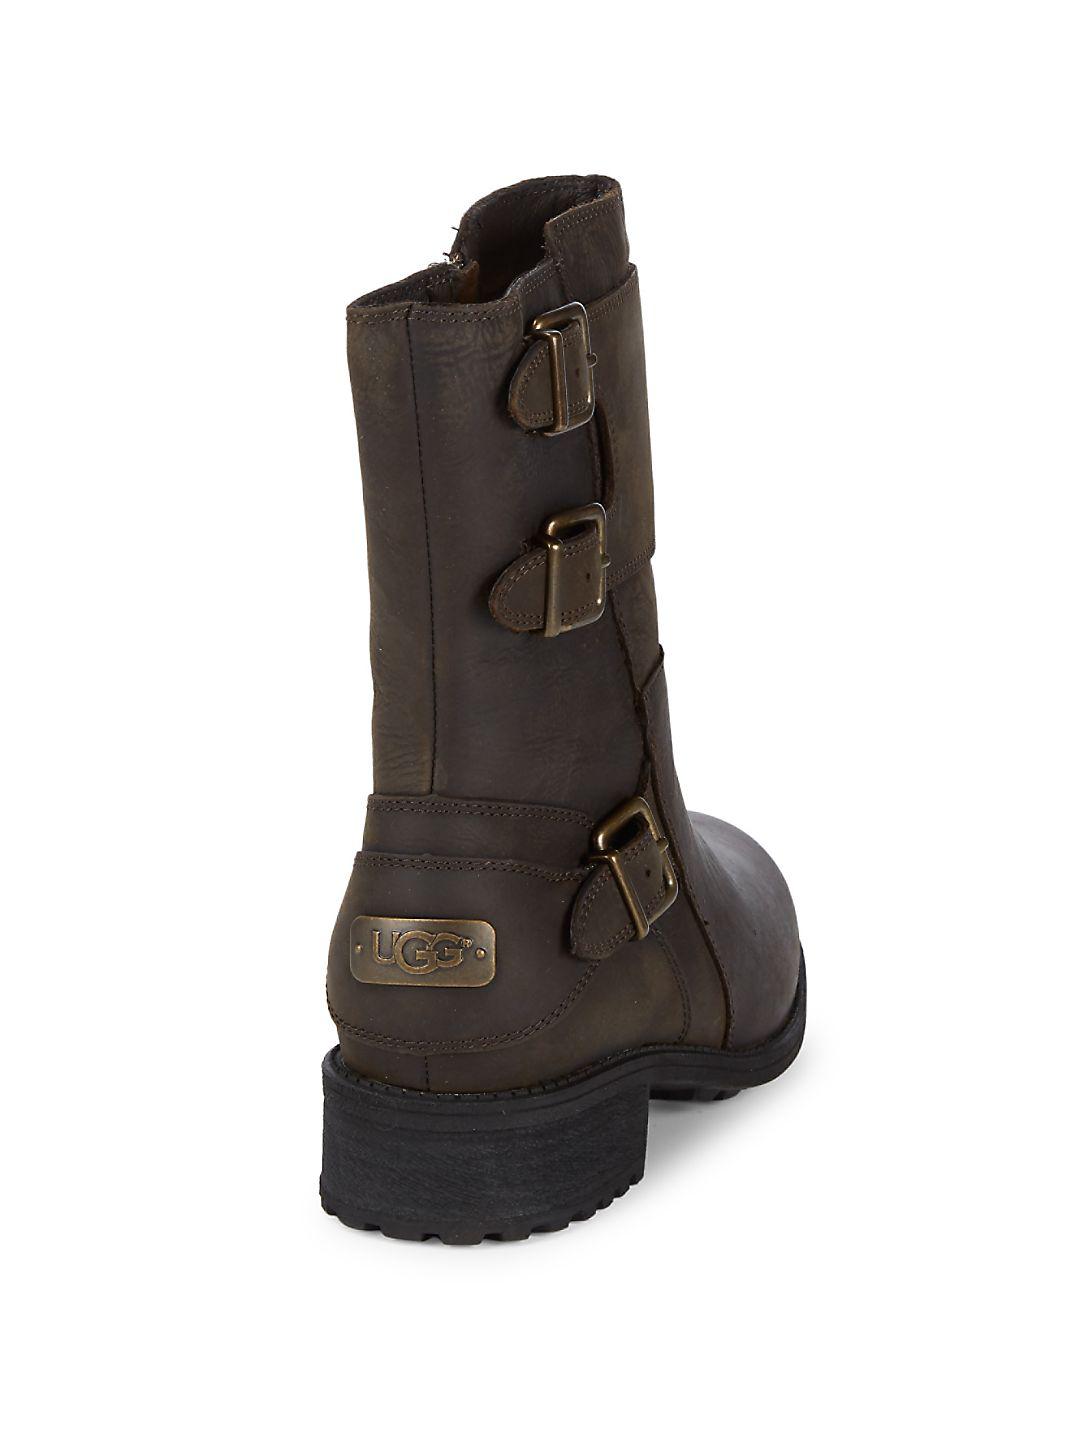 UGG Wilcox Leather Moto Boots in Brown Lyst